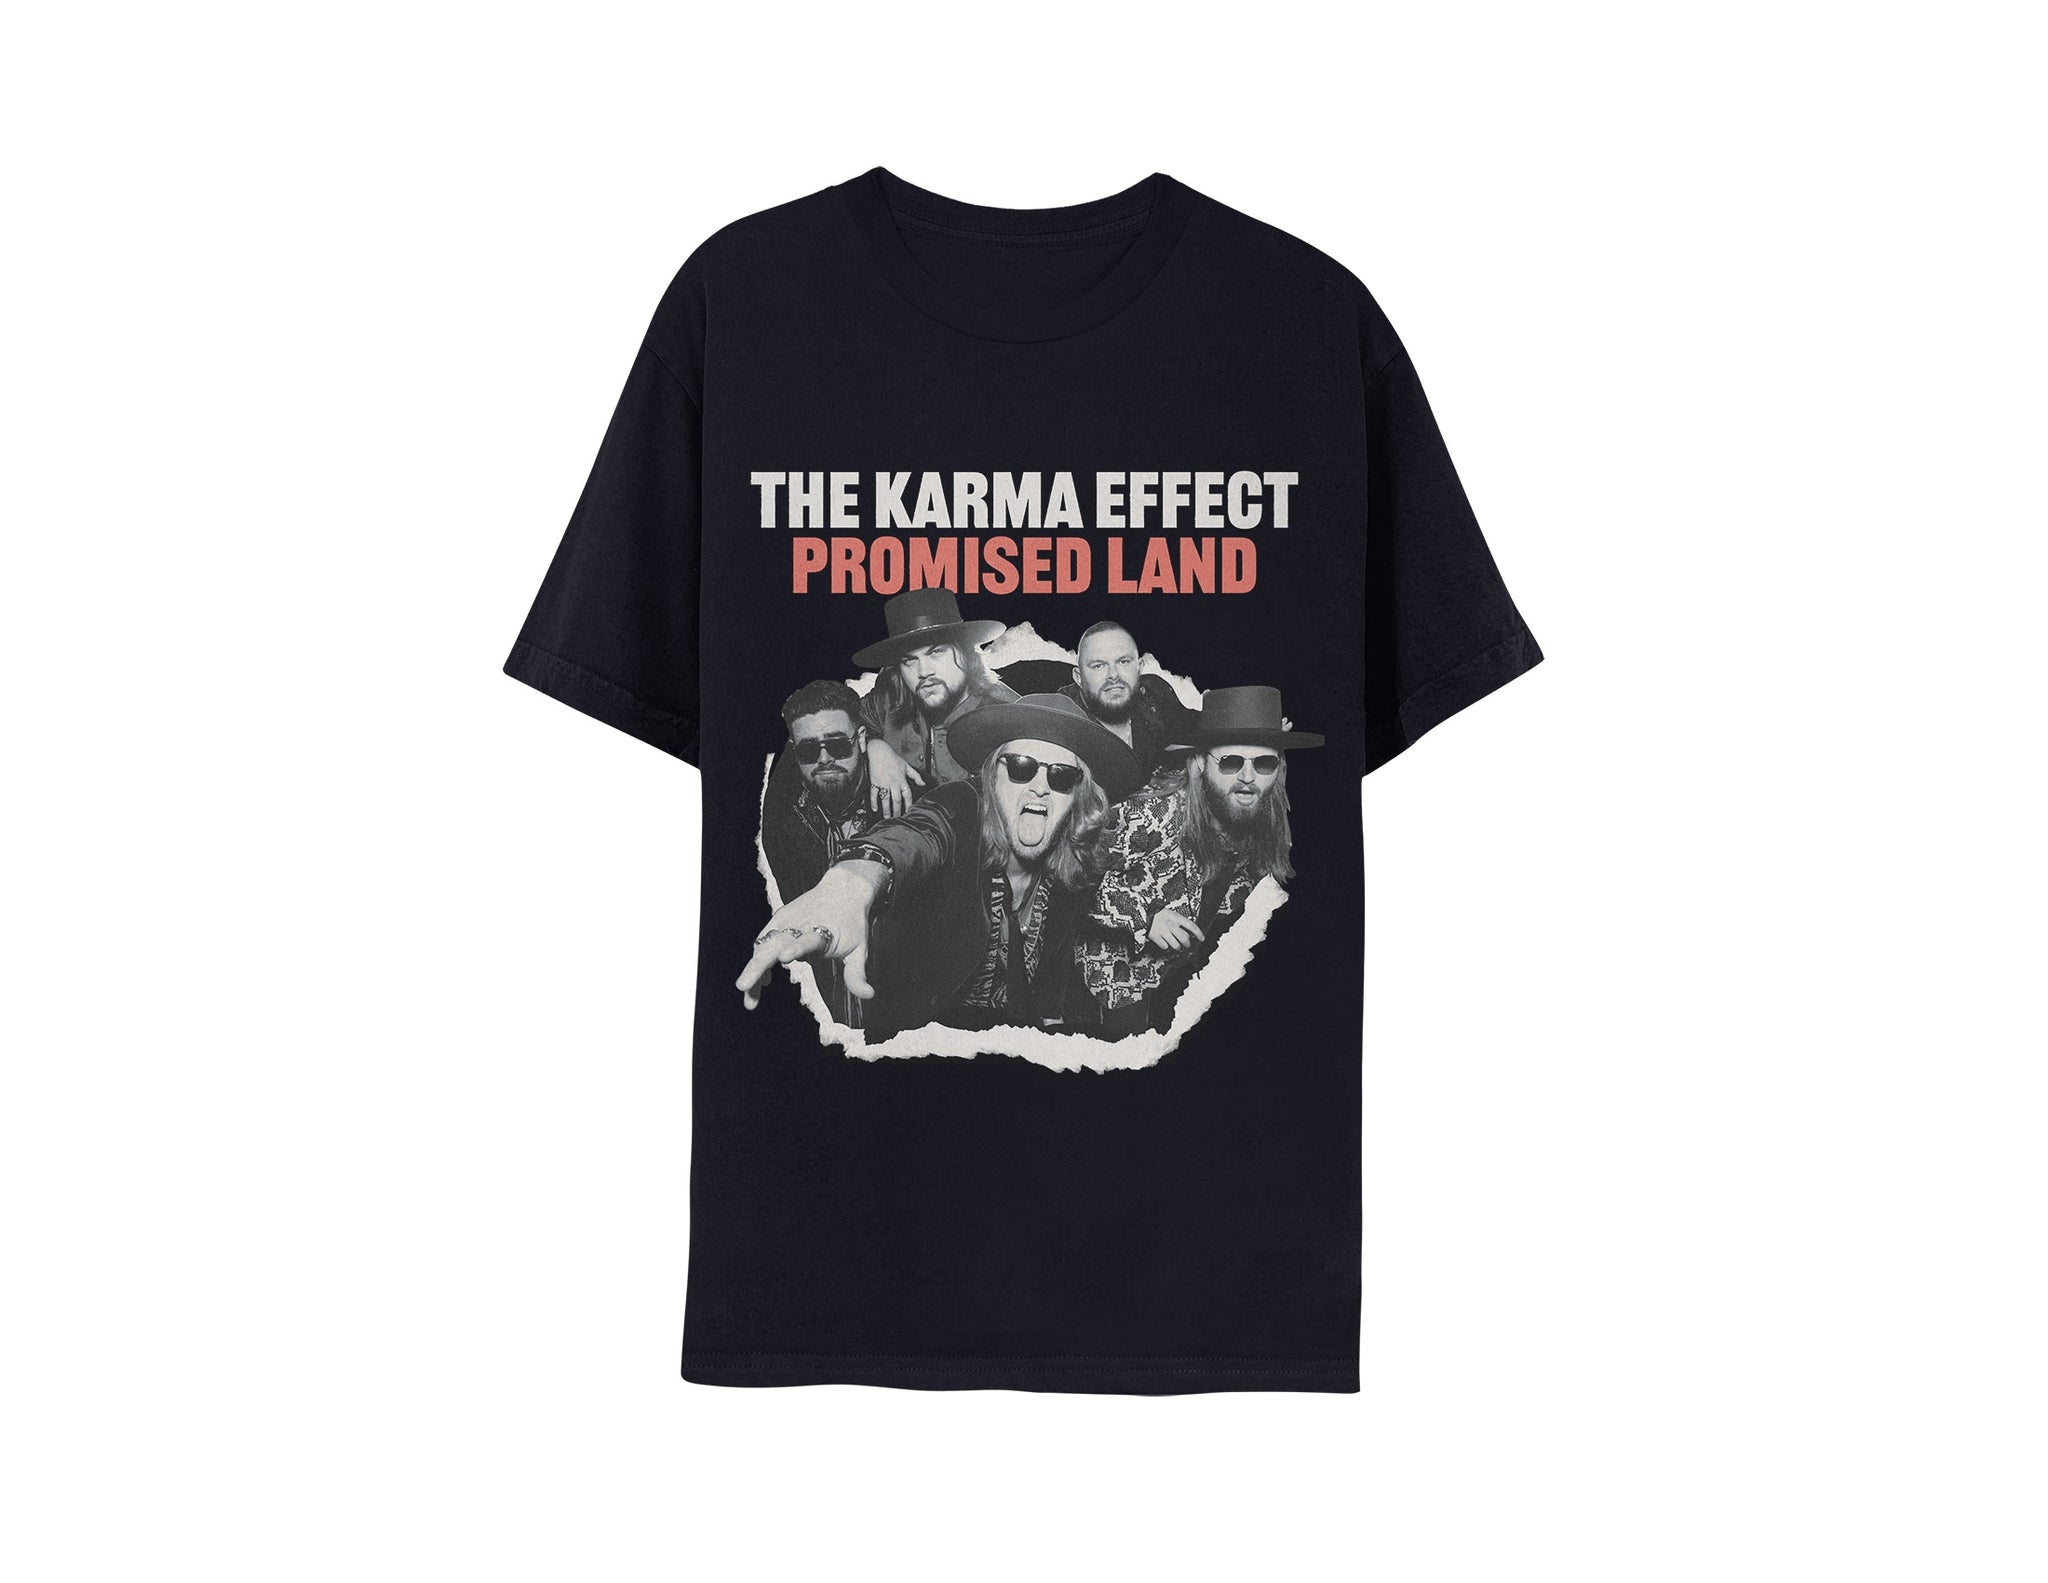 The Karma Effect "Promised Land" T shirt